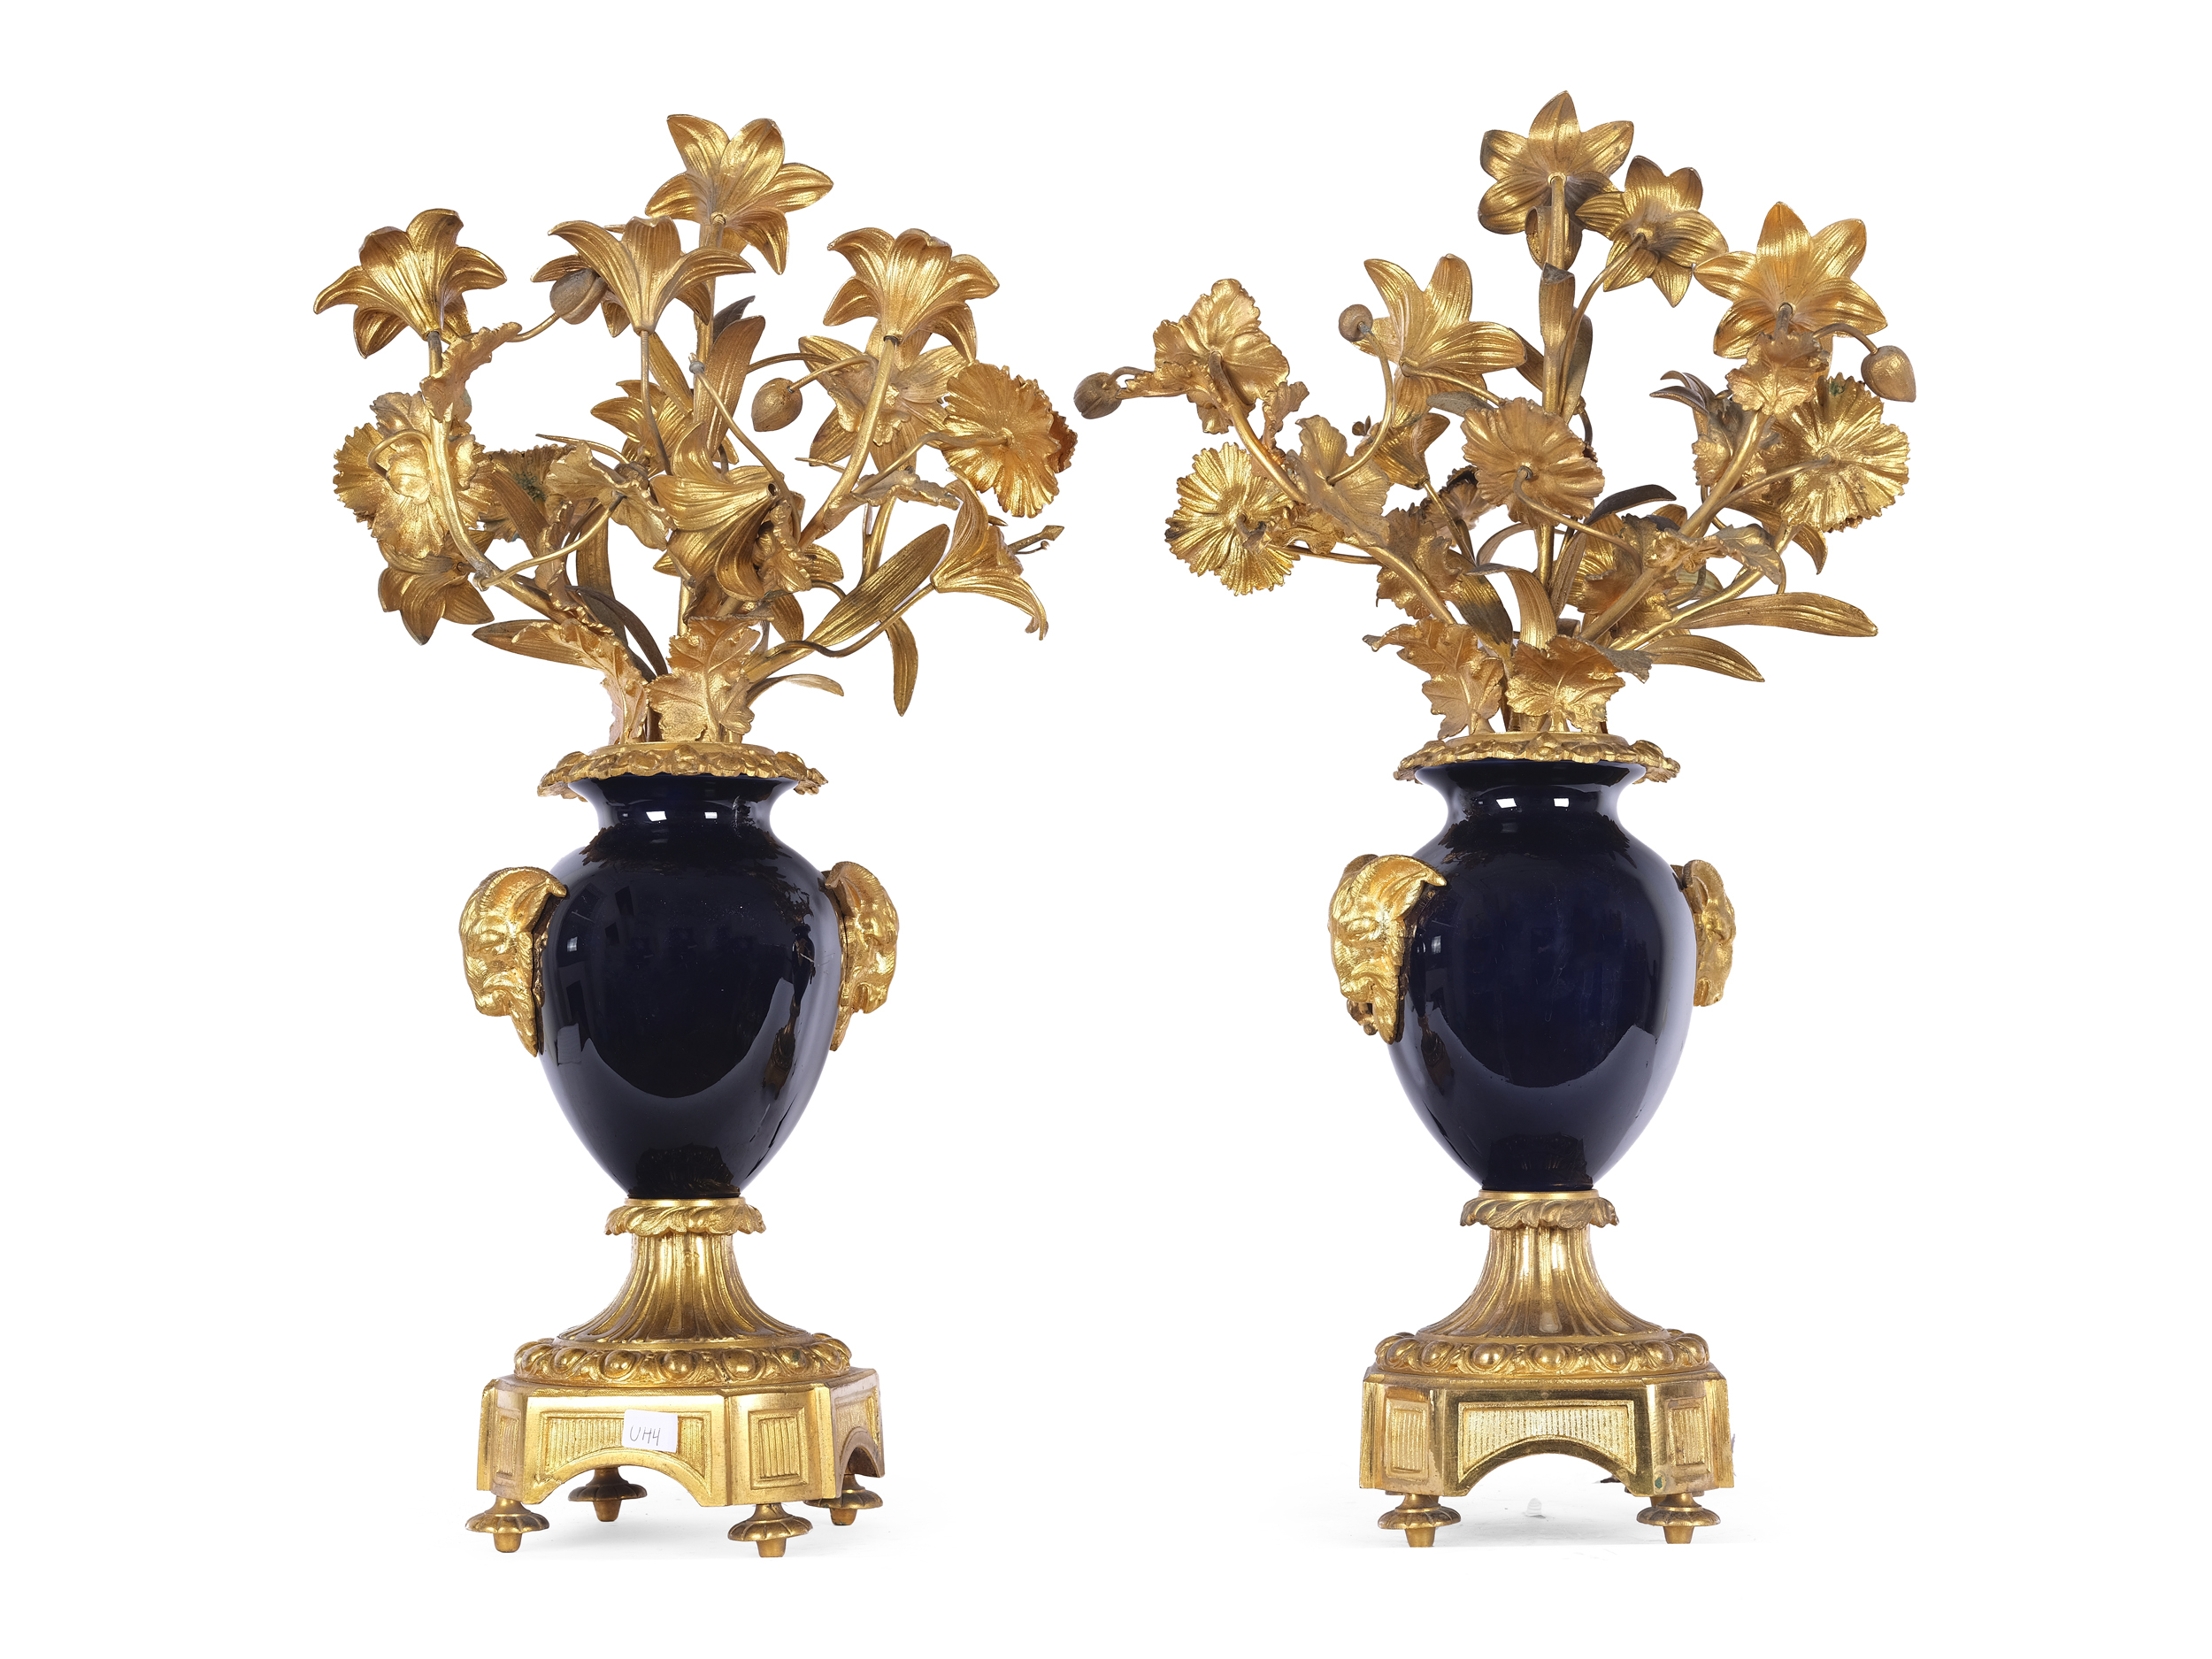 Pair of magnificent vases, France, 2nd half of the 19th century - Image 3 of 3